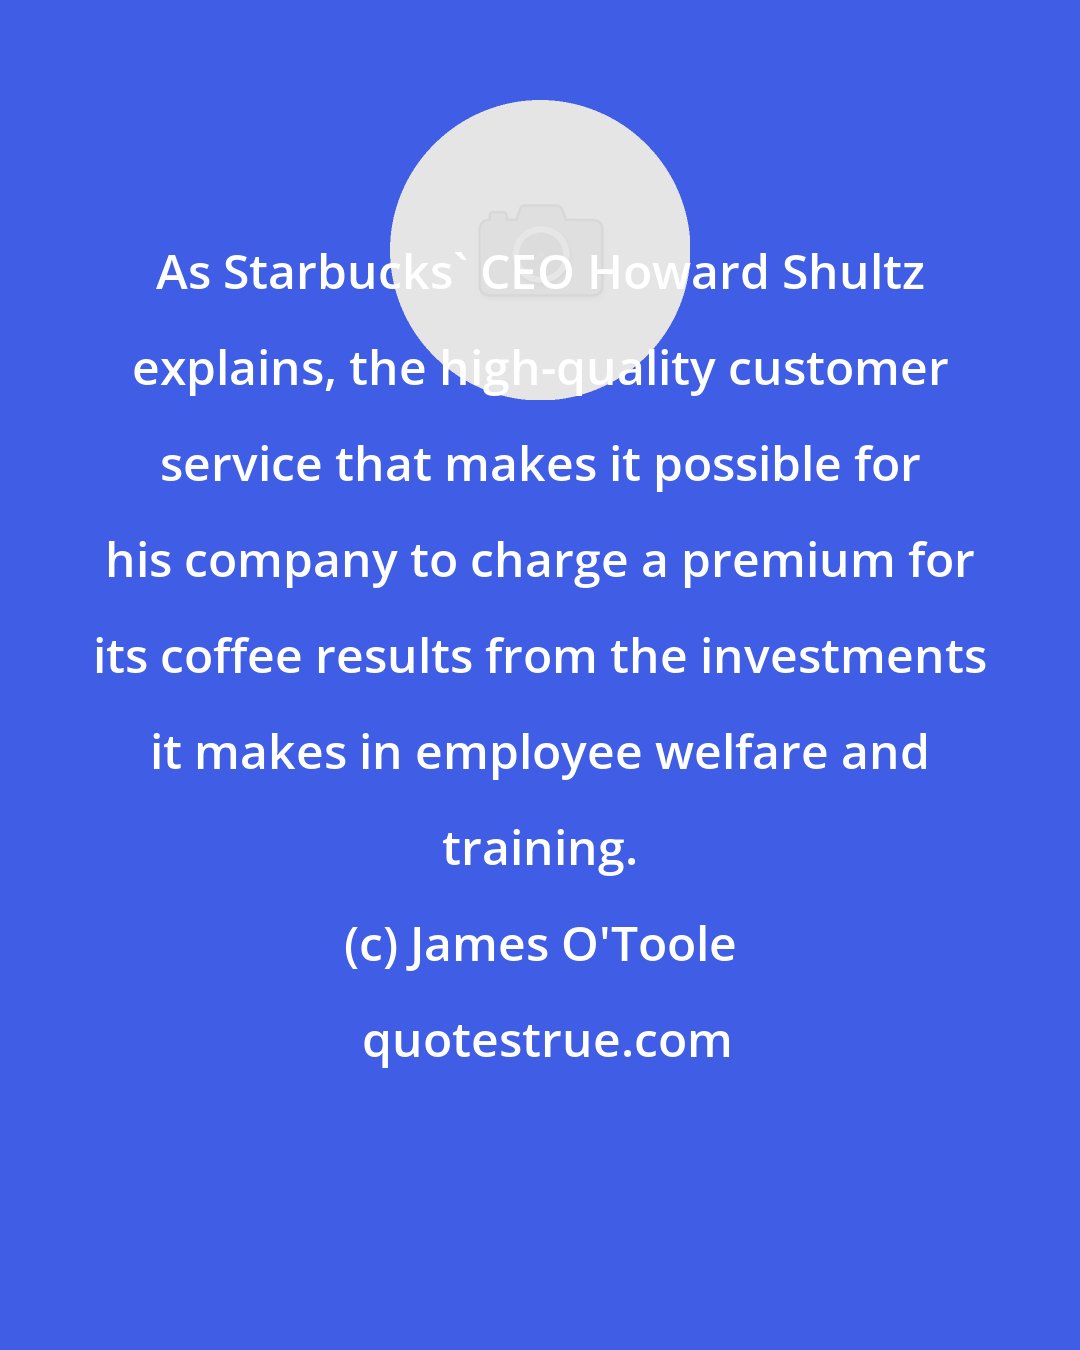 James O'Toole: As Starbucks' CEO Howard Shultz explains, the high-quality customer service that makes it possible for his company to charge a premium for its coffee results from the investments it makes in employee welfare and training.